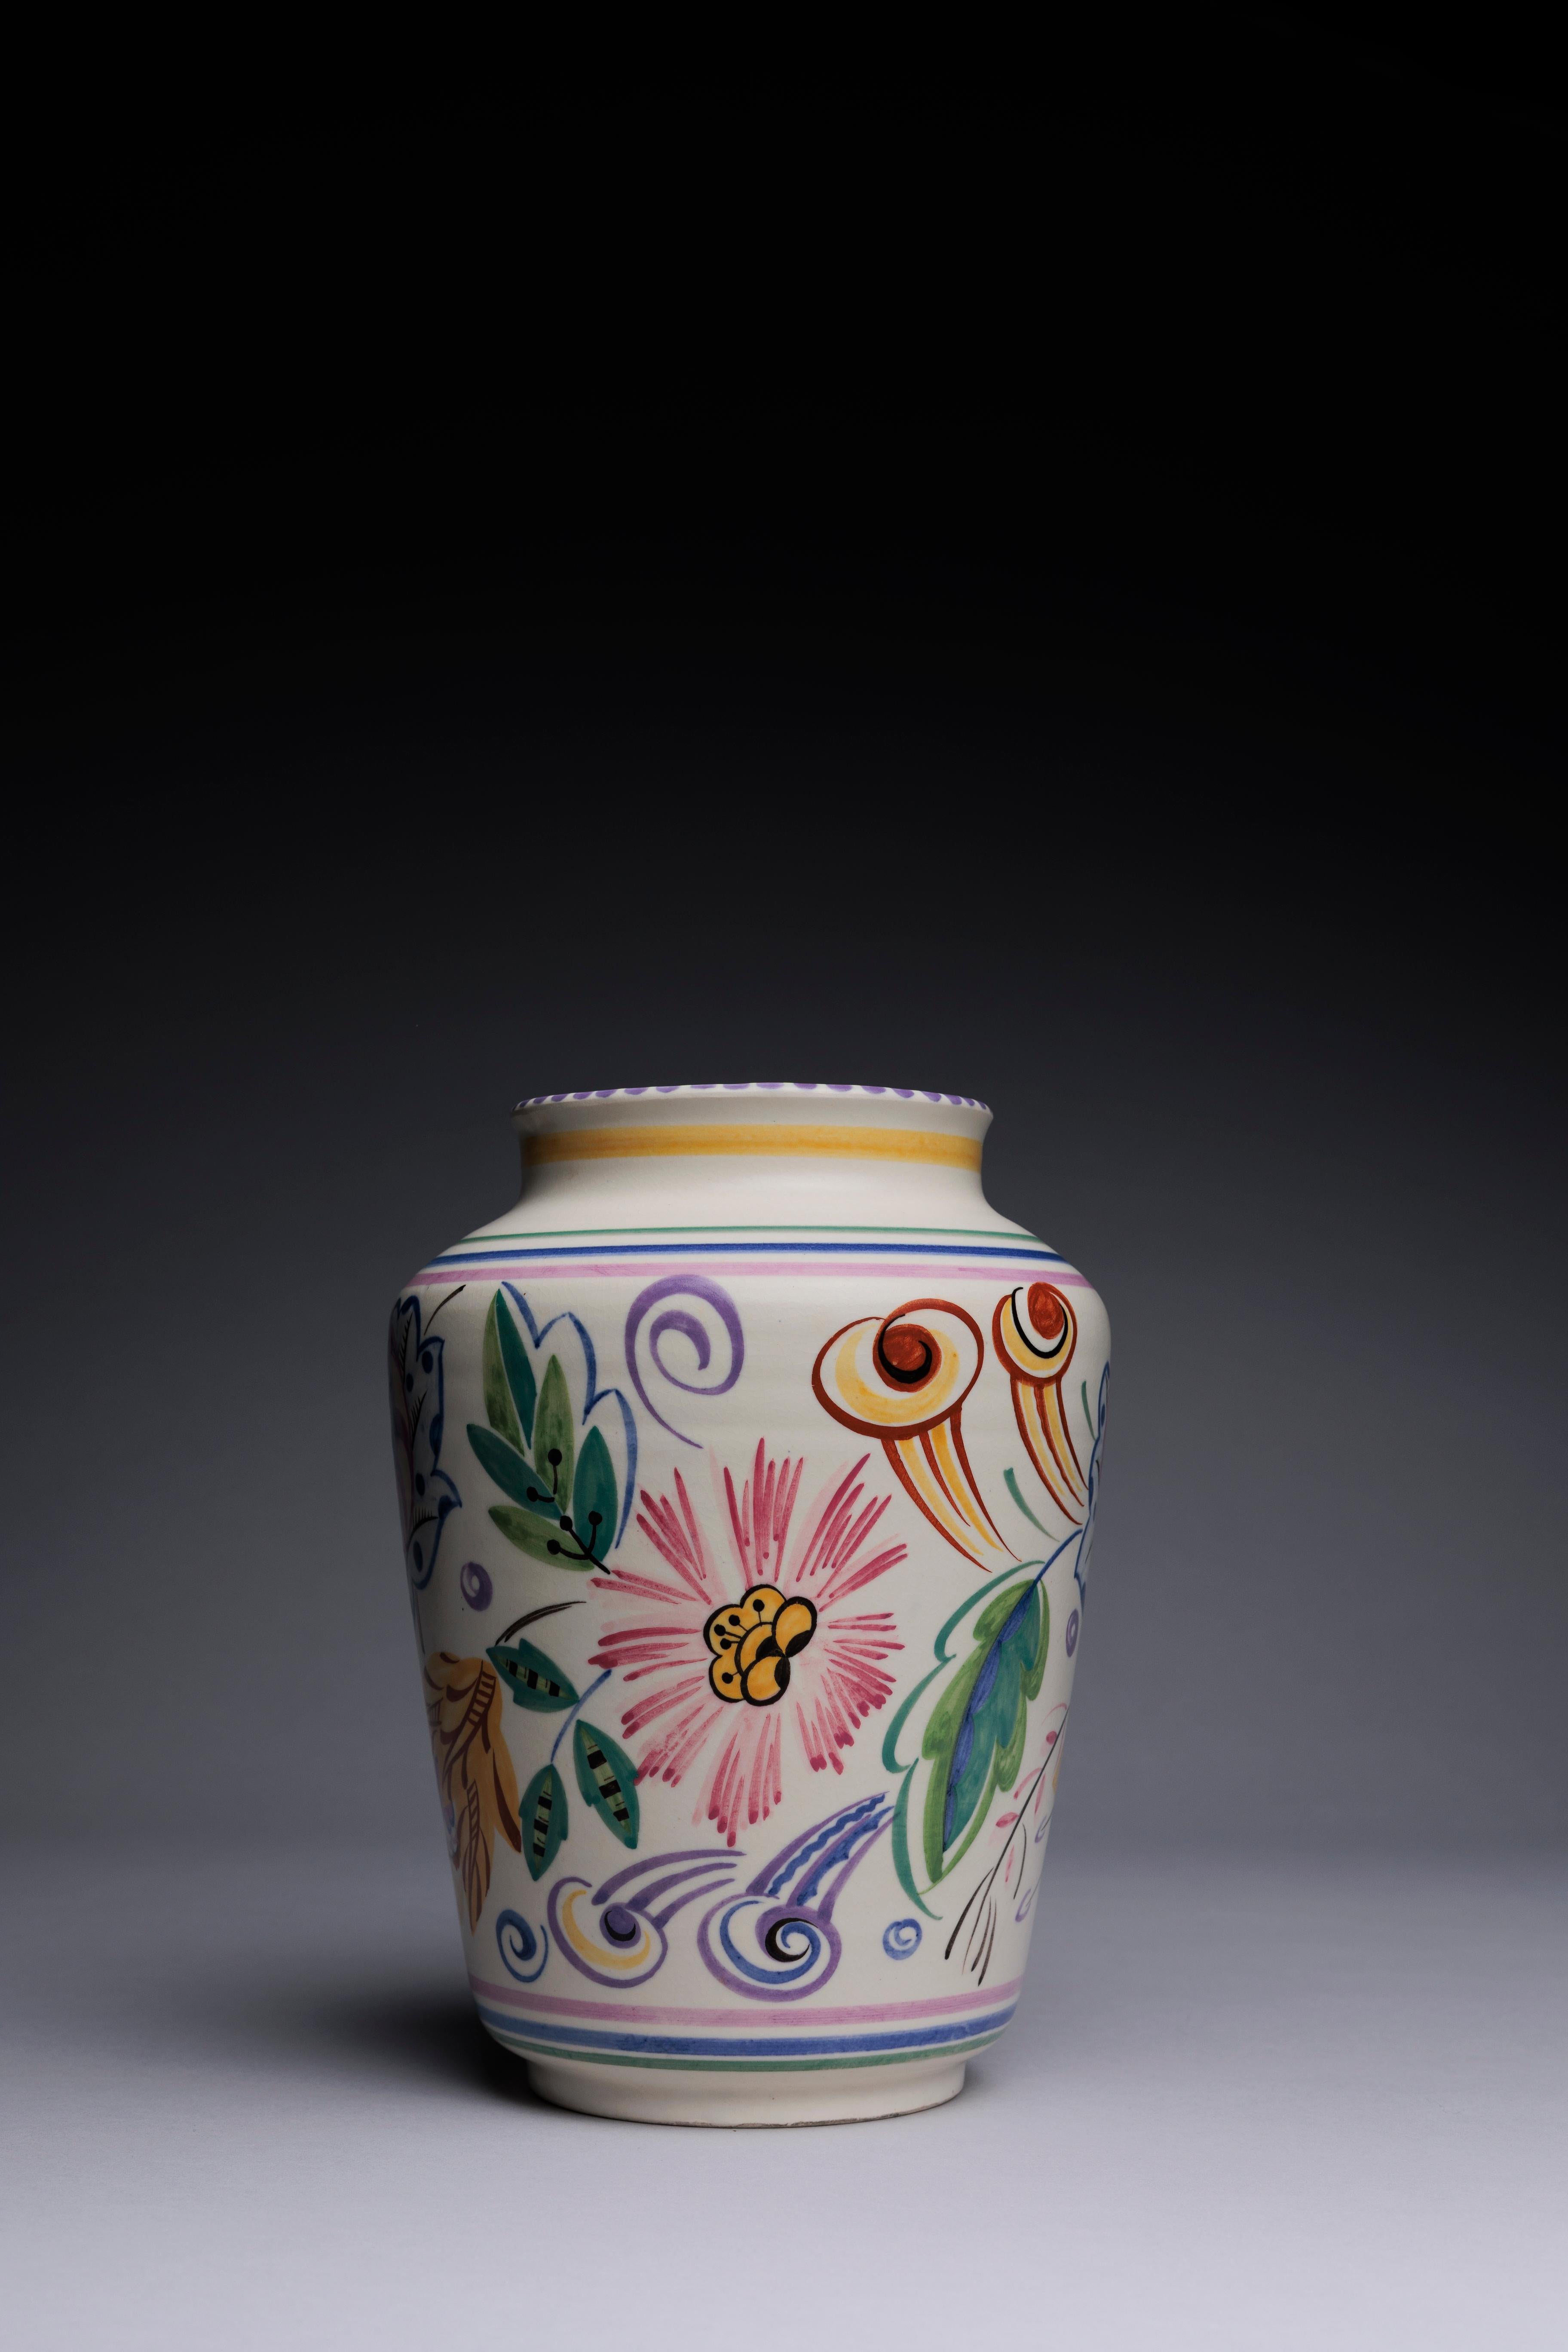 The design of this Poole Pottery vase belongs to a relatively understudied figure in ceramics design history: Truda Carter. Working as lead designer at the firm for nearly 30 years, Carter was responsible for developing the Poole aesthetic. This